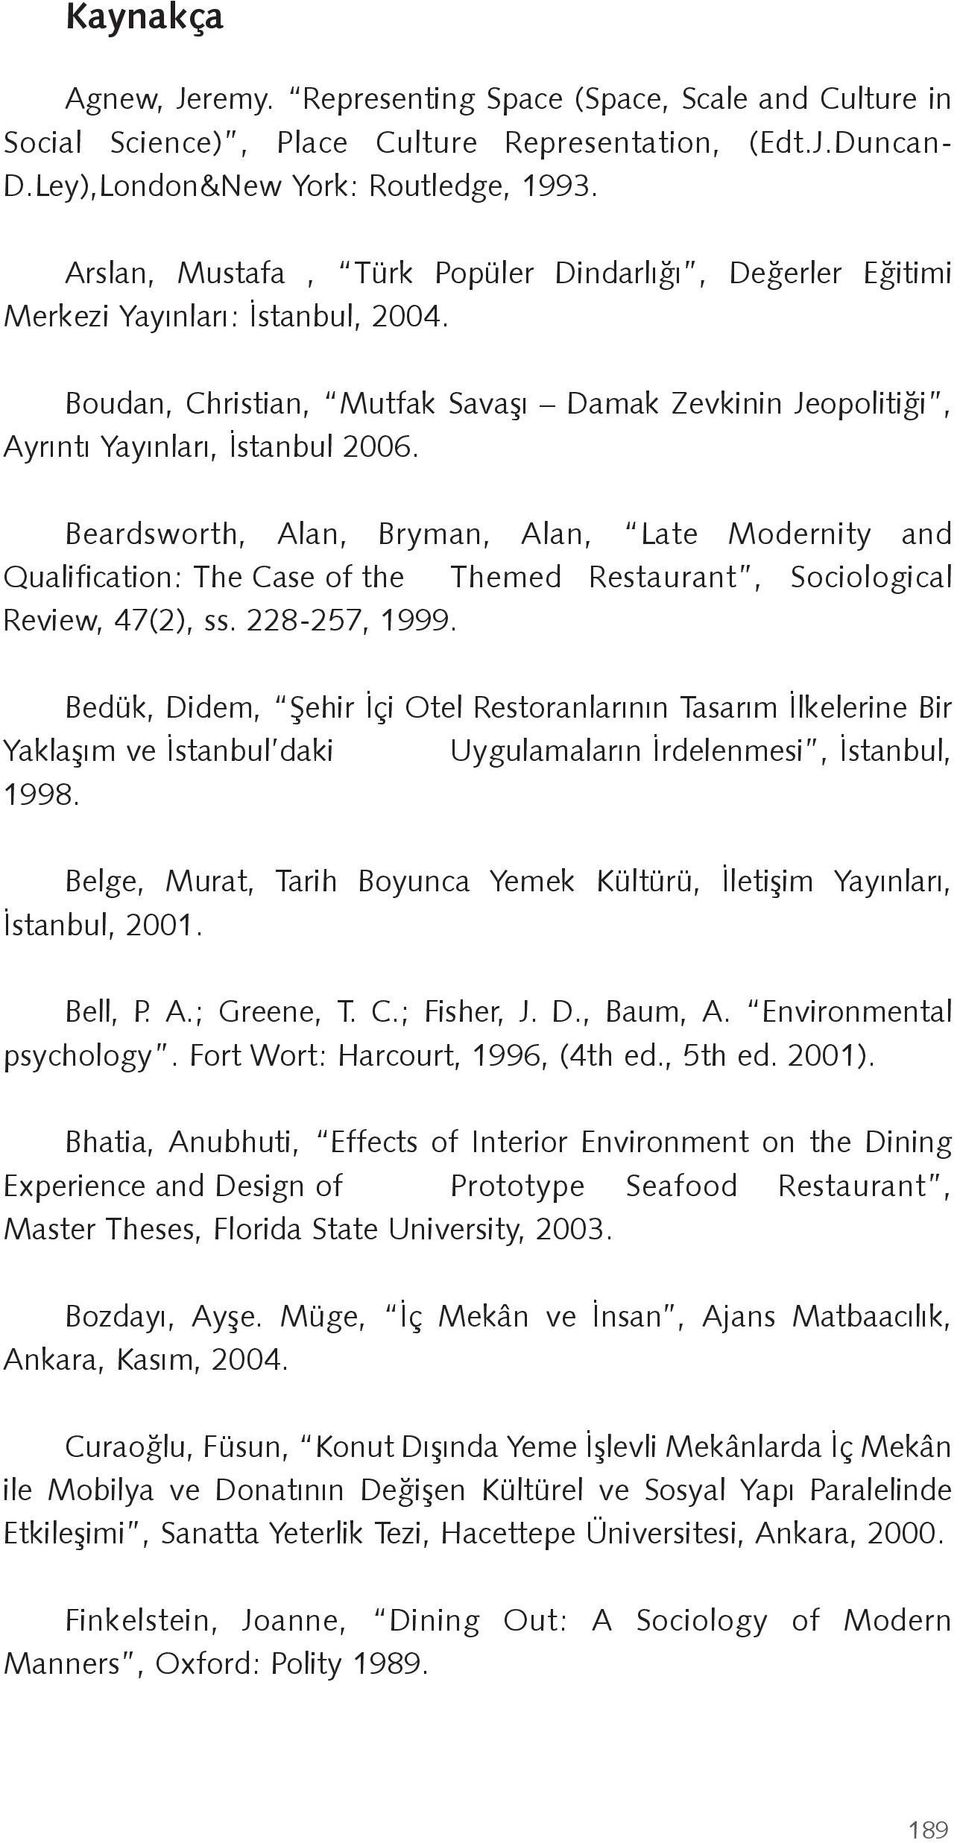 Beardsworth, Alan, Bryman, Alan, Late Modernity and Qualification: The Case of the Themed Restaurant, Sociological Review, 47(2), ss. 228-257, 1999.